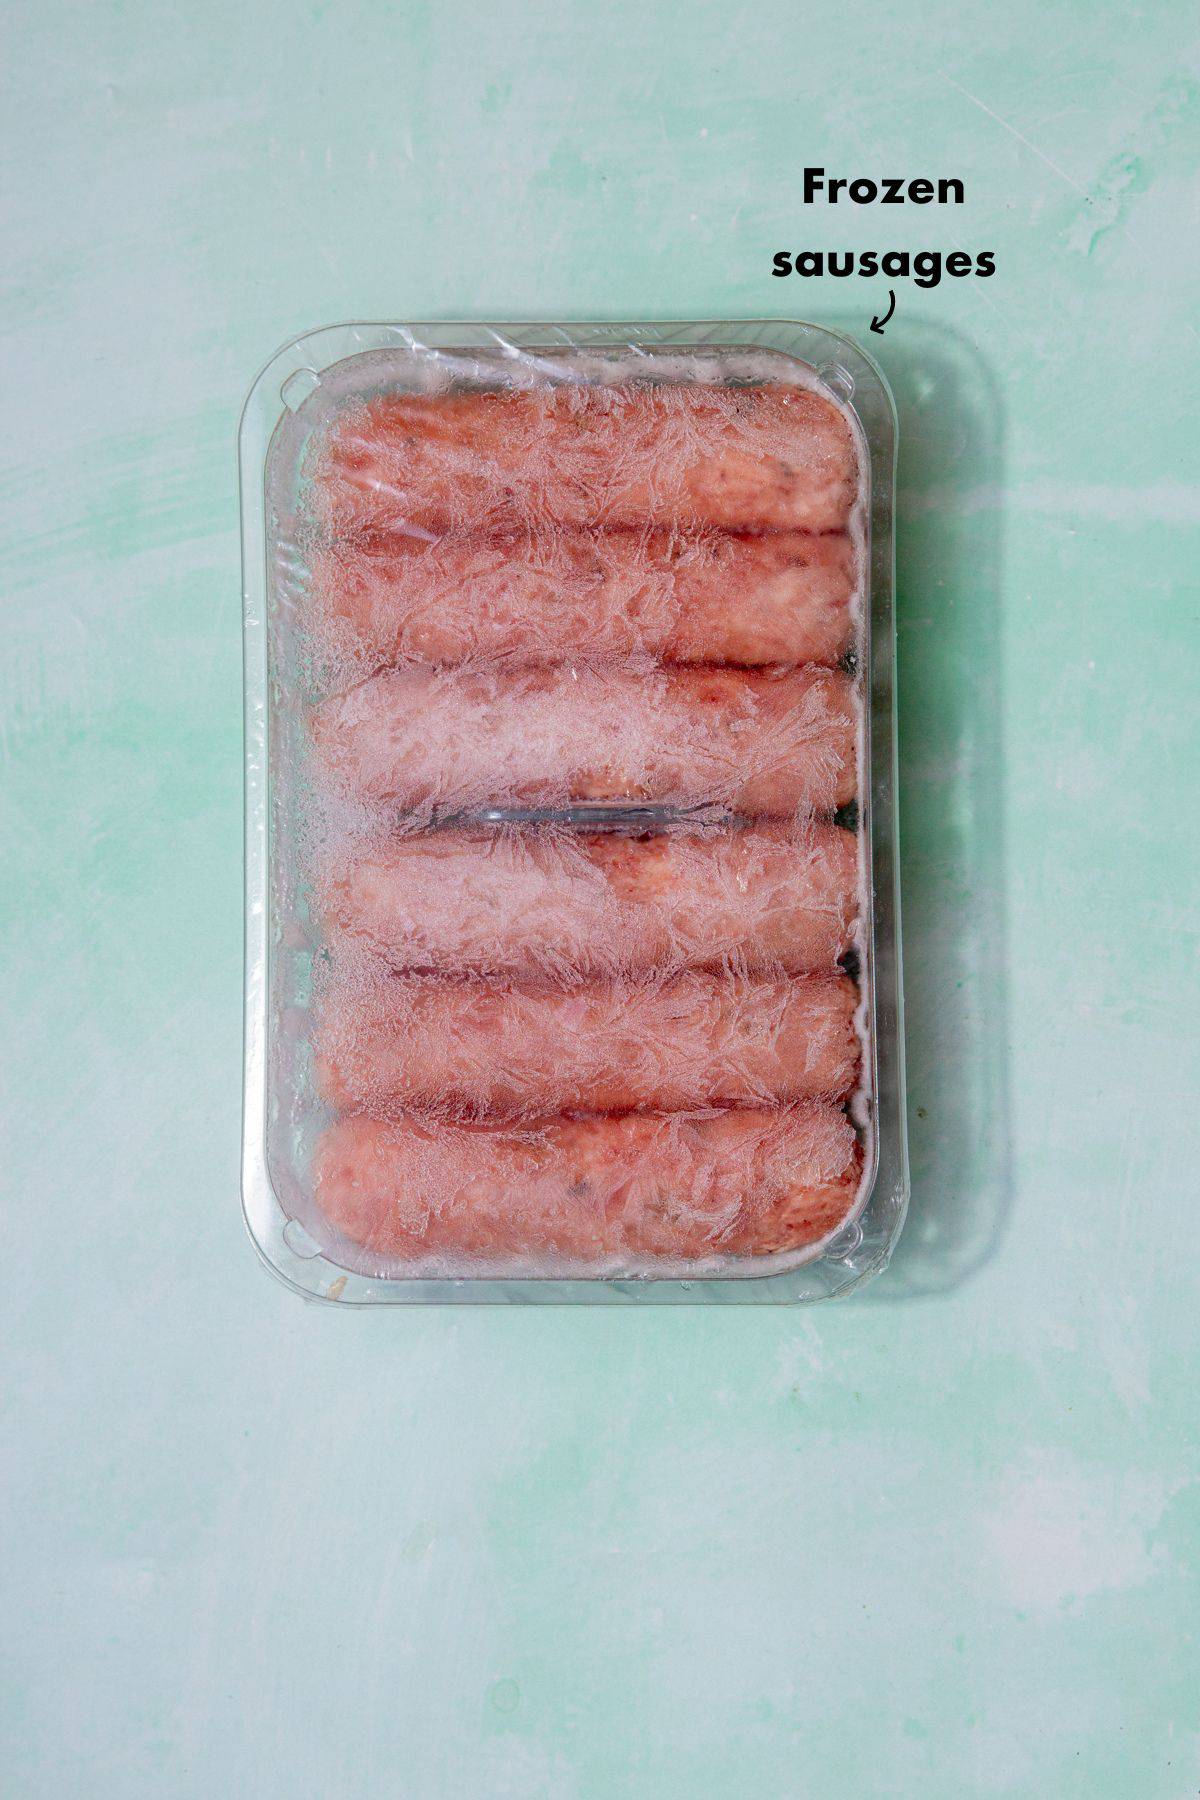 6 frozen saiusages in a plastic container on a pale blue background and labelled.